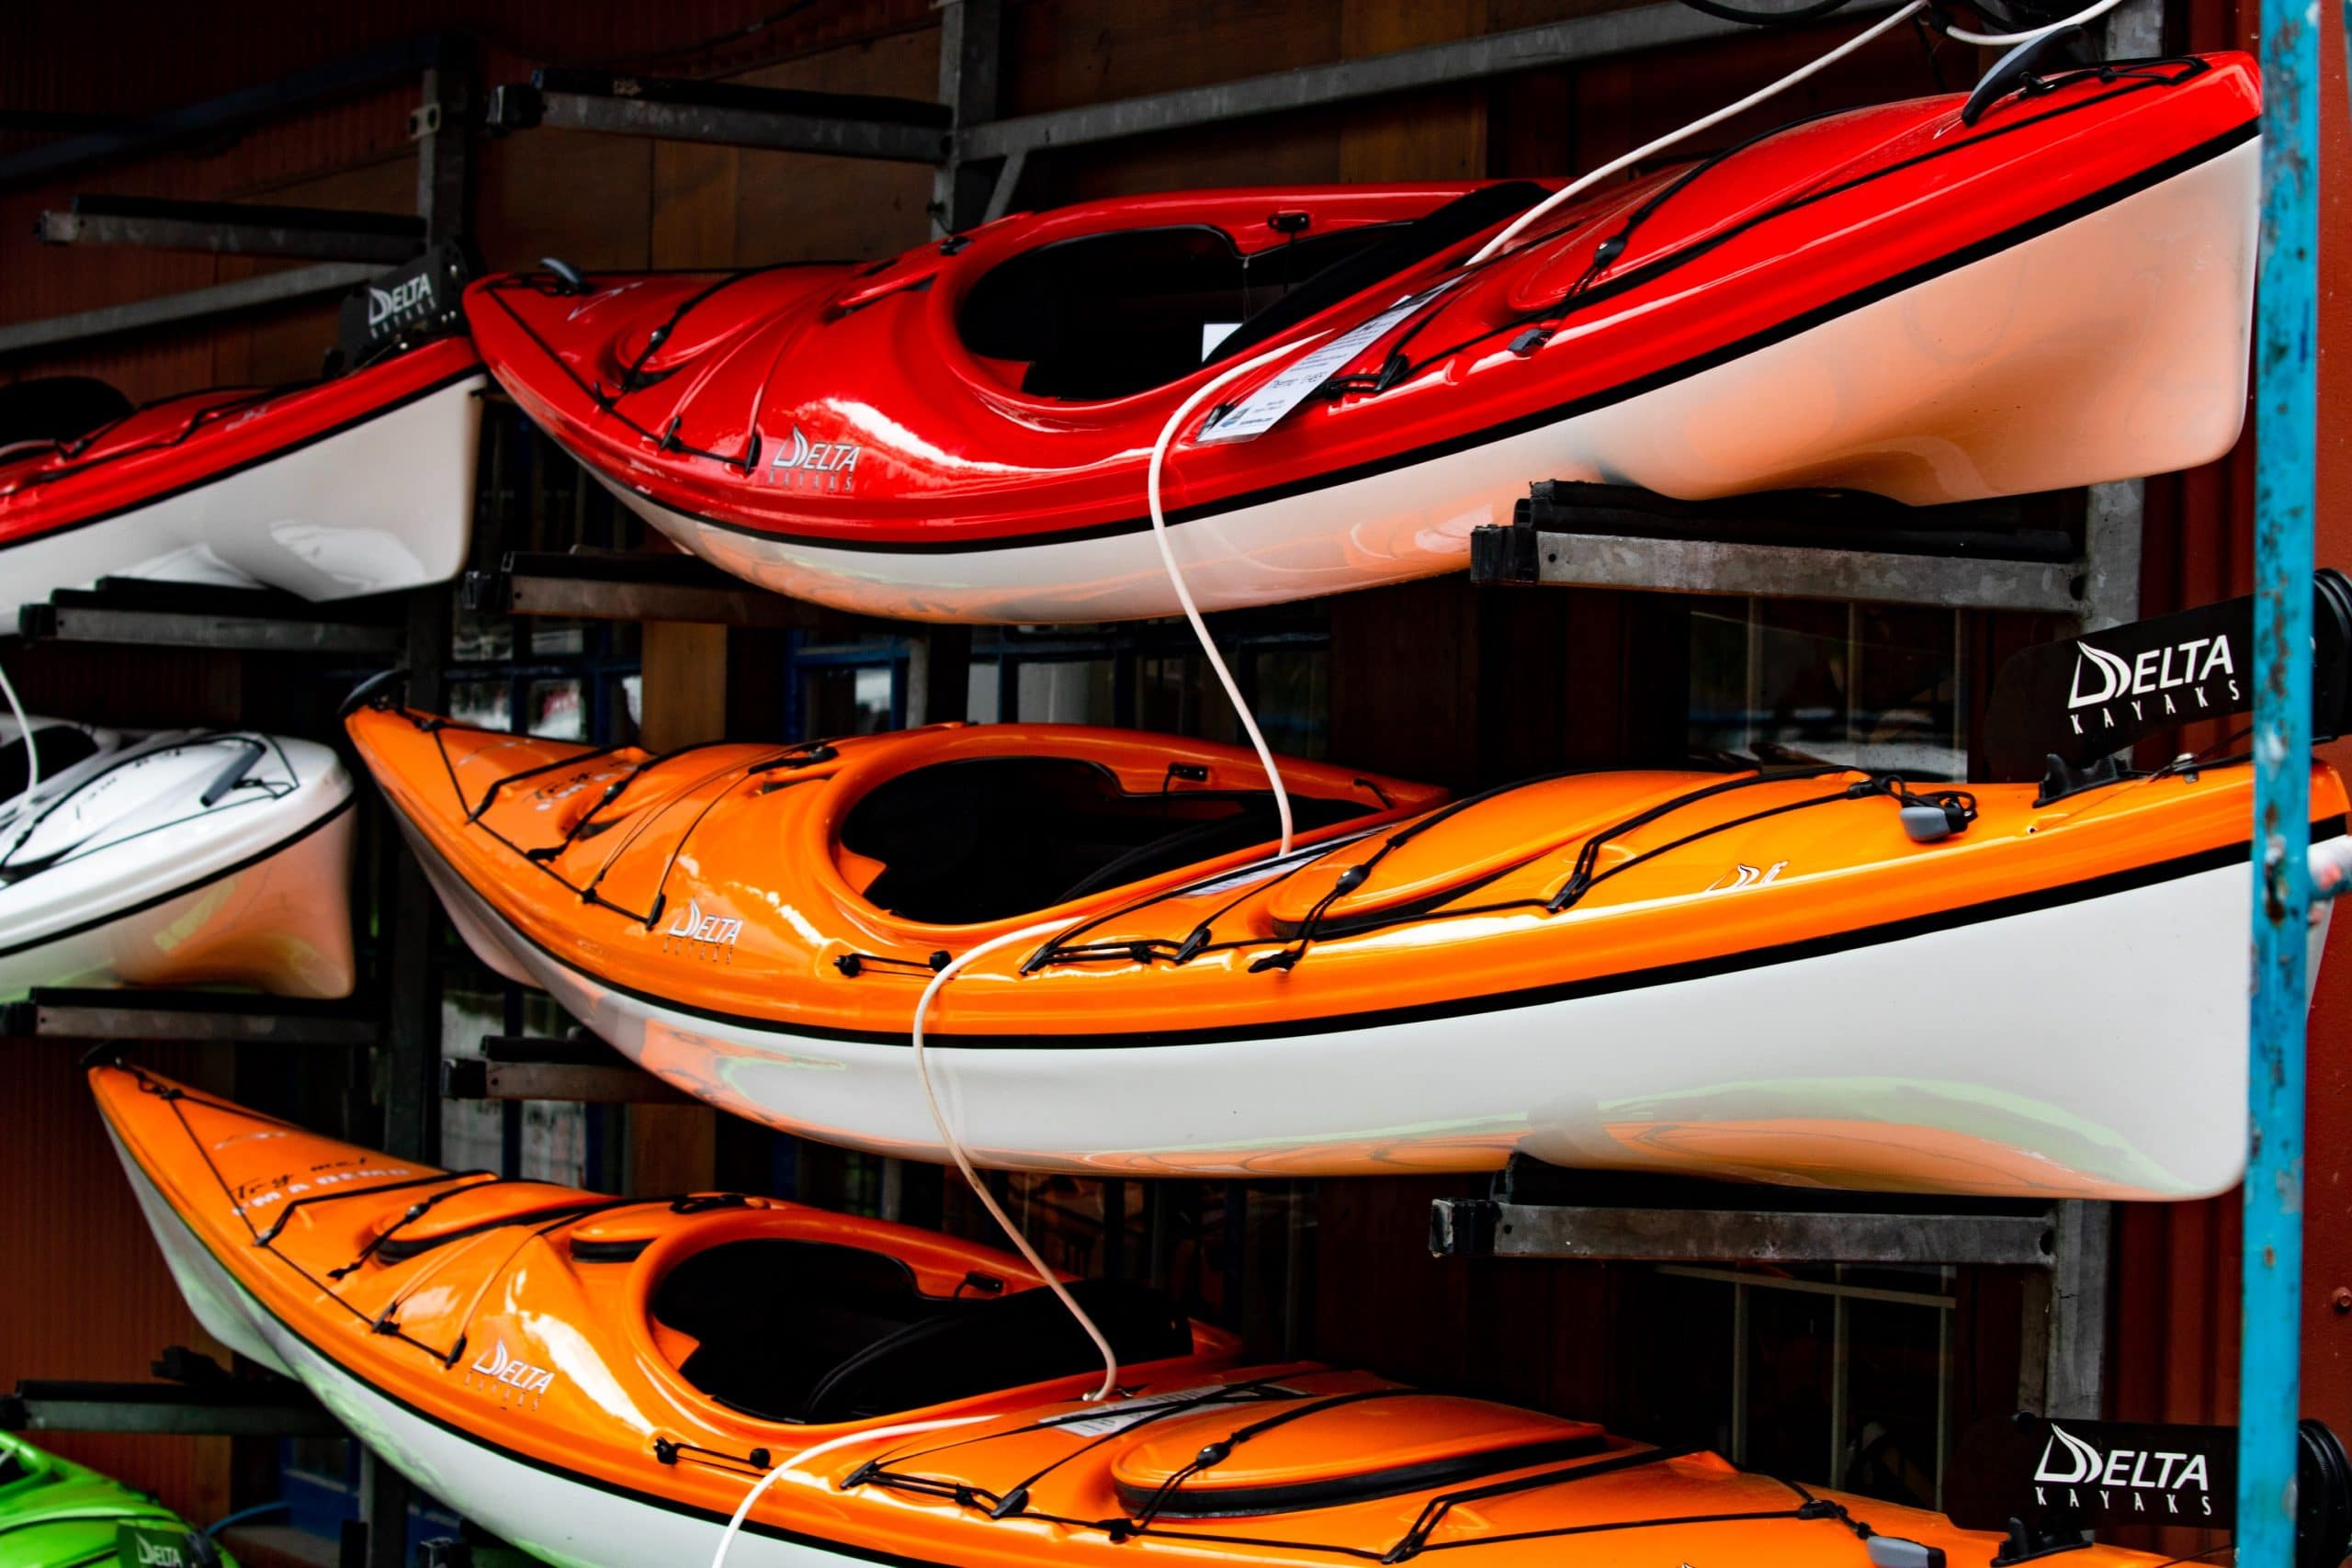 Which Is A Faster Kayak: Paddle Or Pedal?